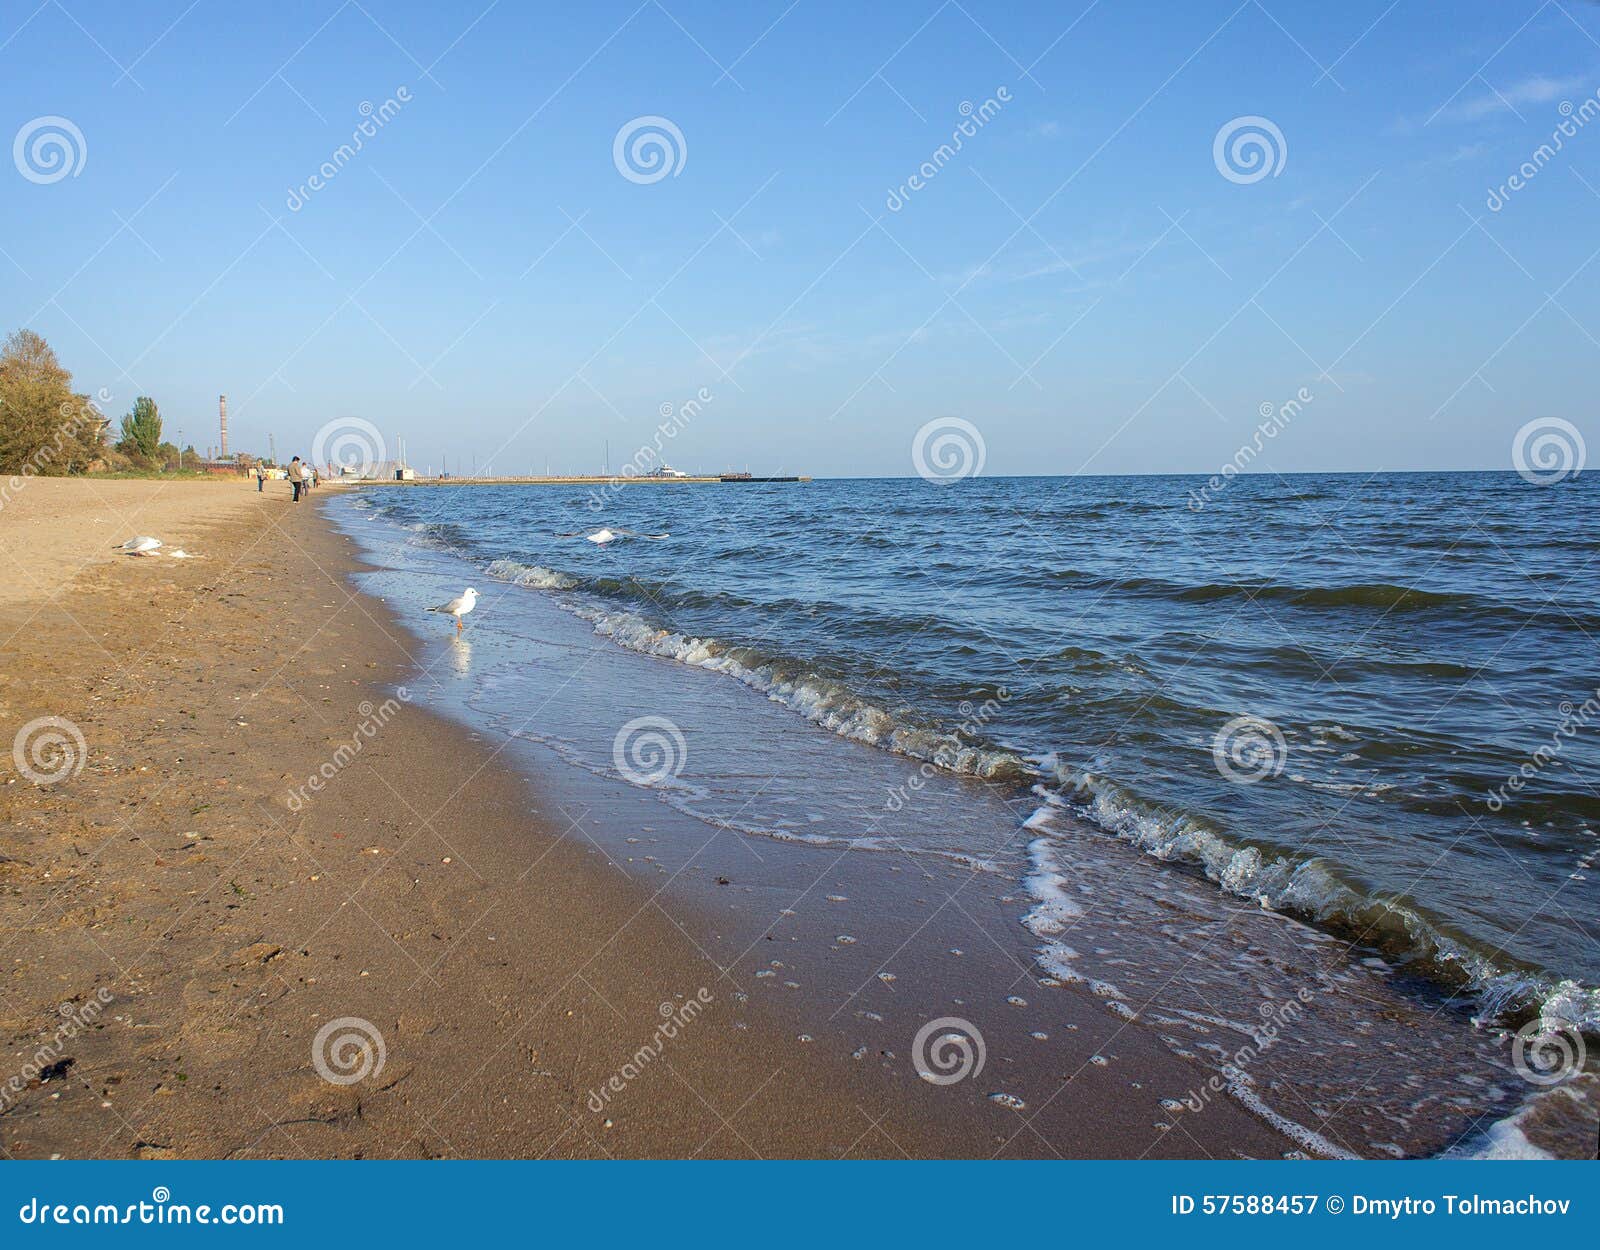 coastline of the city of mariupol in the evening